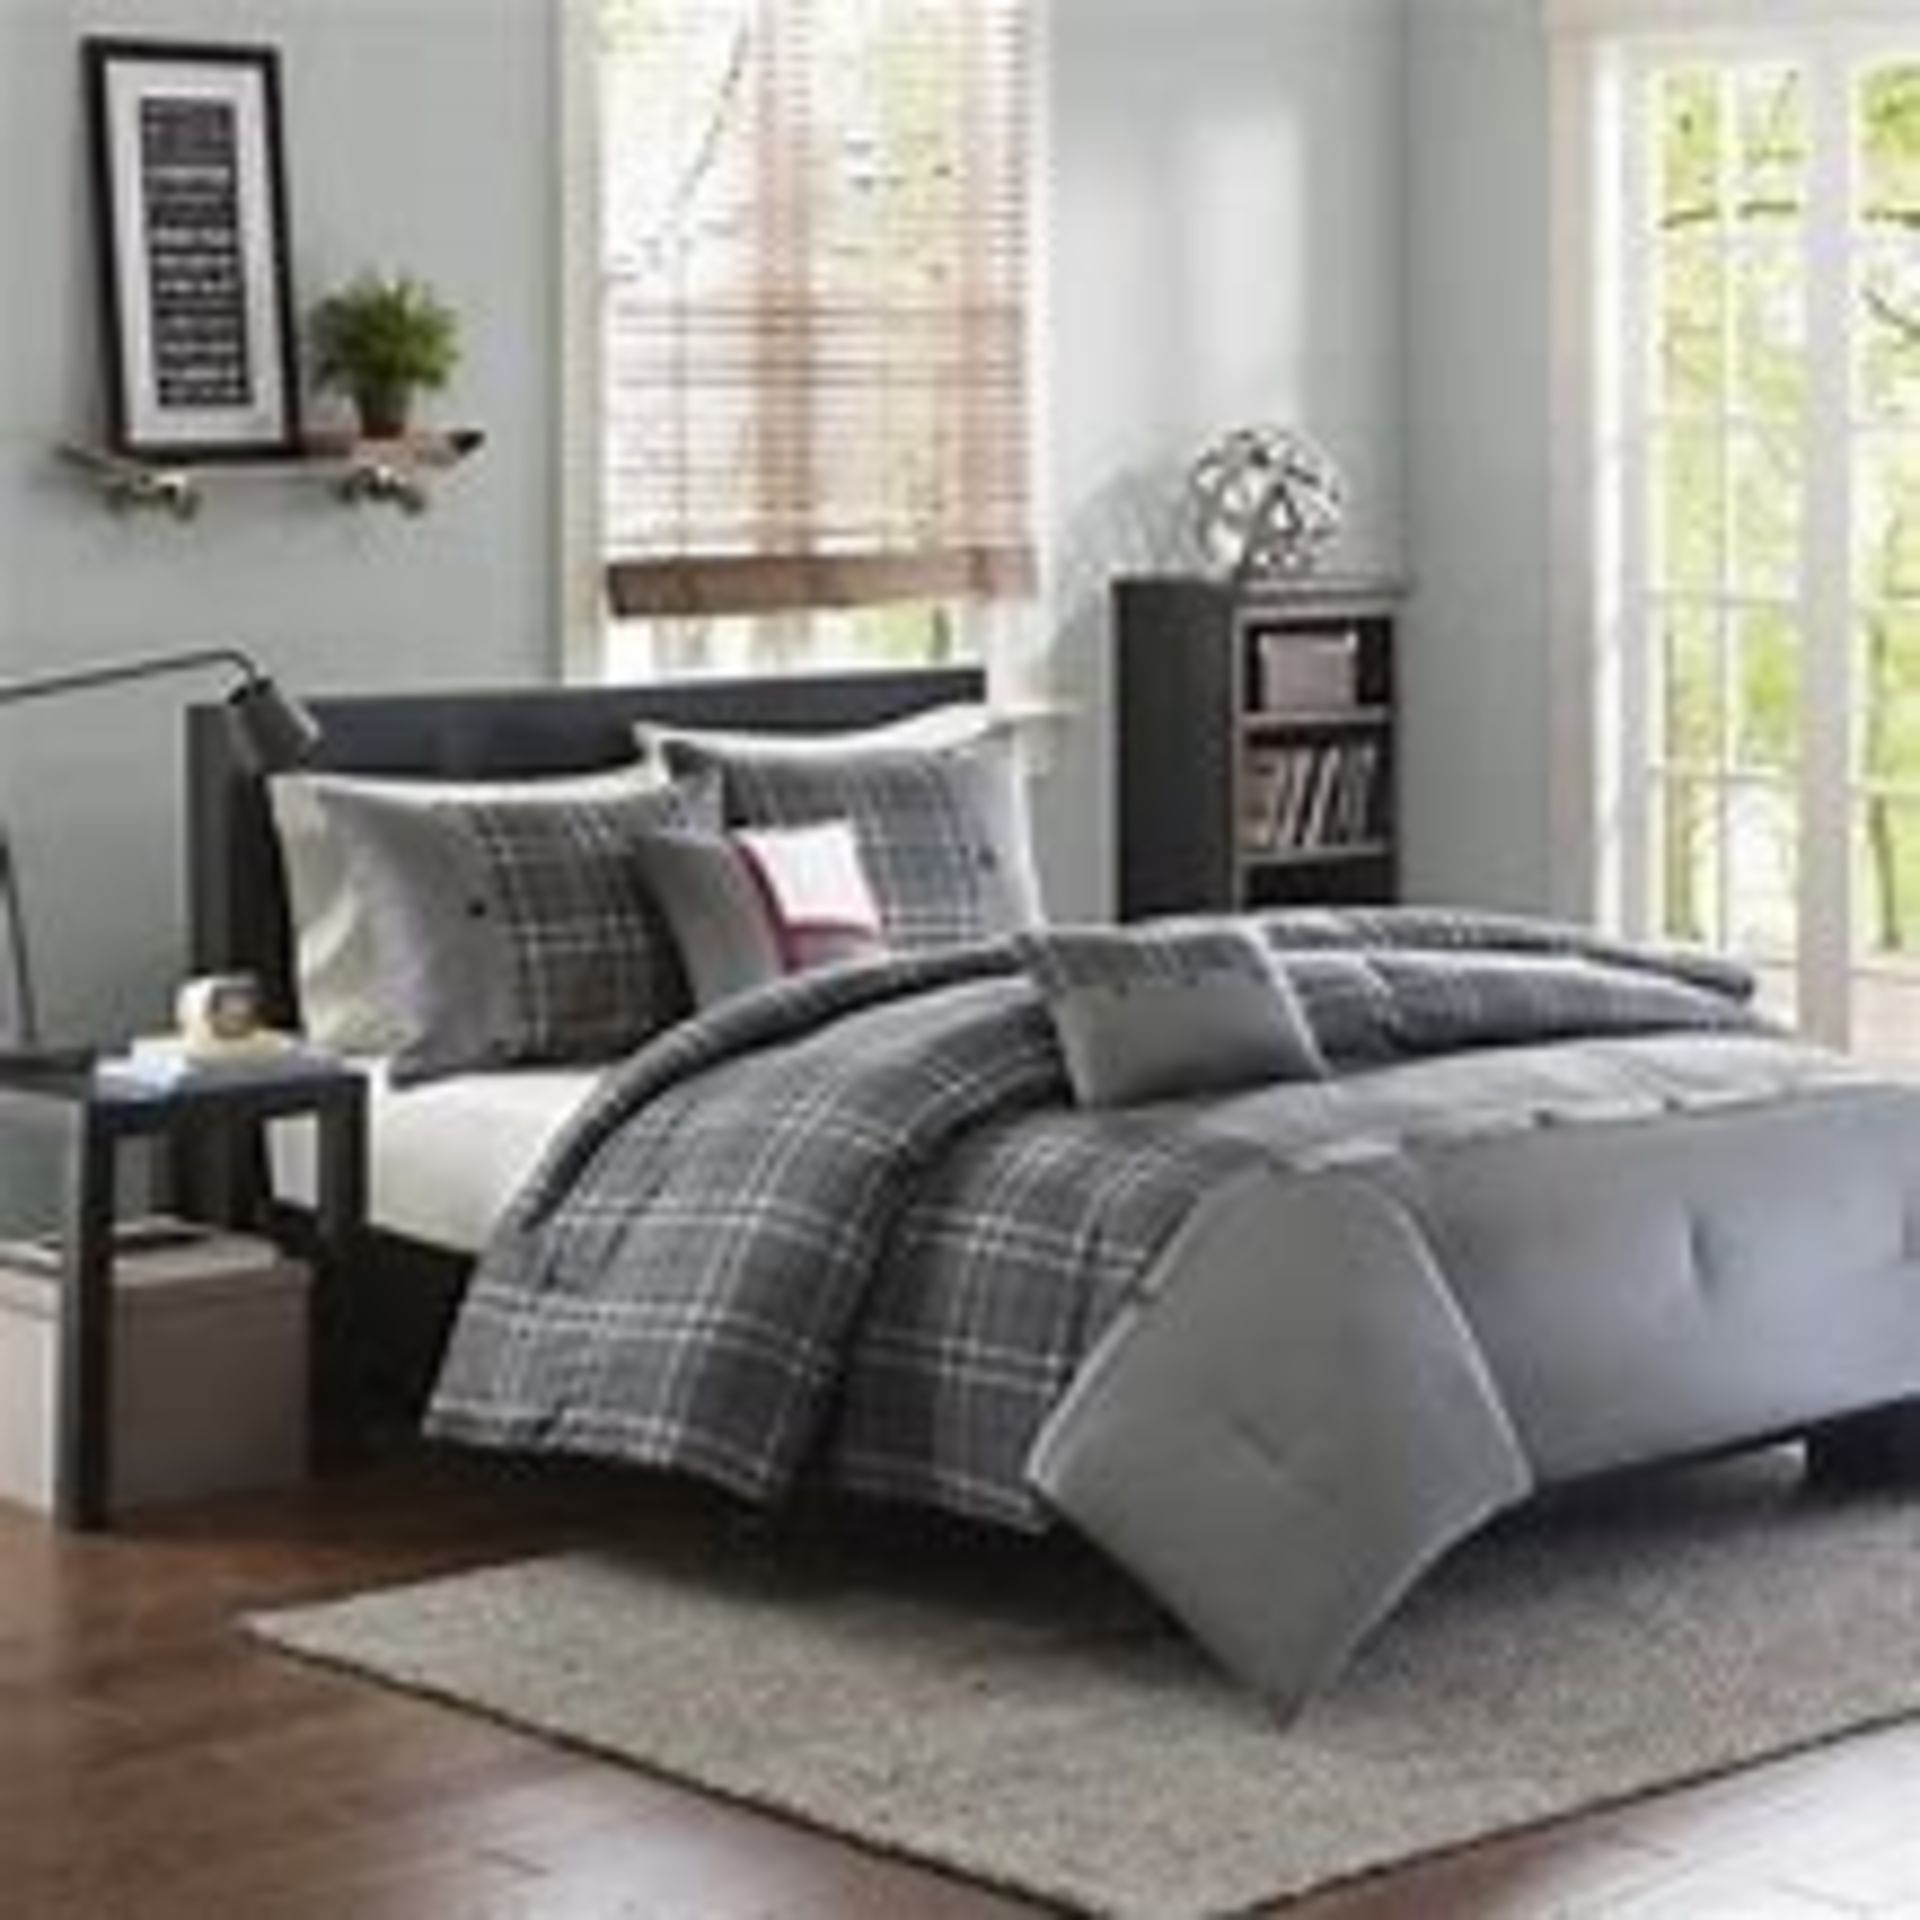 1 AS NEW BAGGED CAMPBELL CHECK SINGLE DUVET SET IN GREY (VIEWING HIGHLY RECOMMENDED)